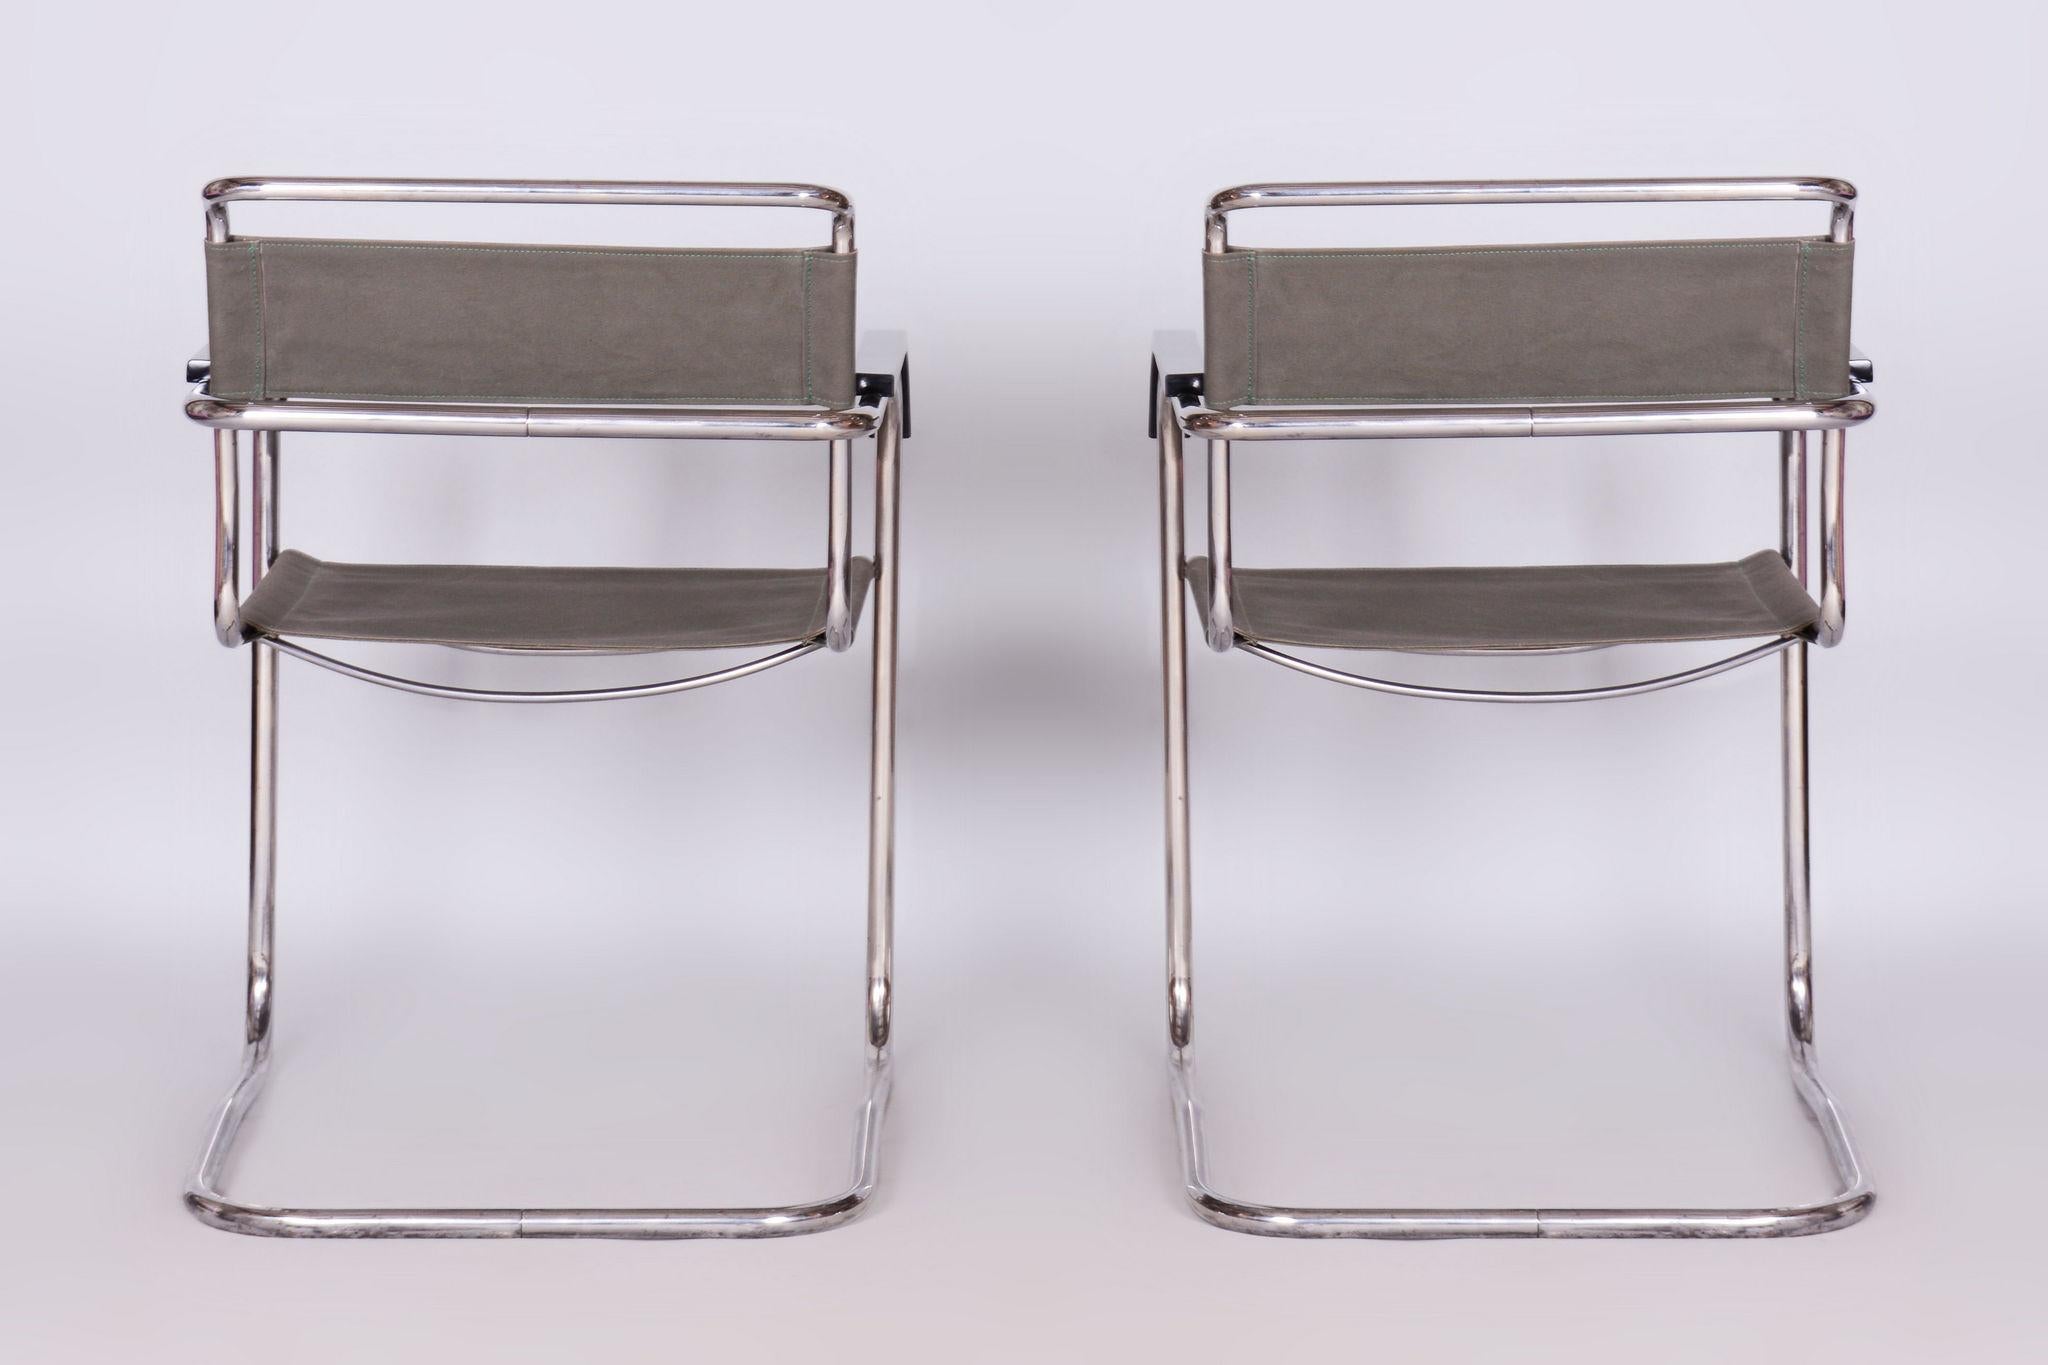 Restored Bauhaus Pair of Armchairs, by Thonet, by Marcel Breuer, Czech, 1930s For Sale 4